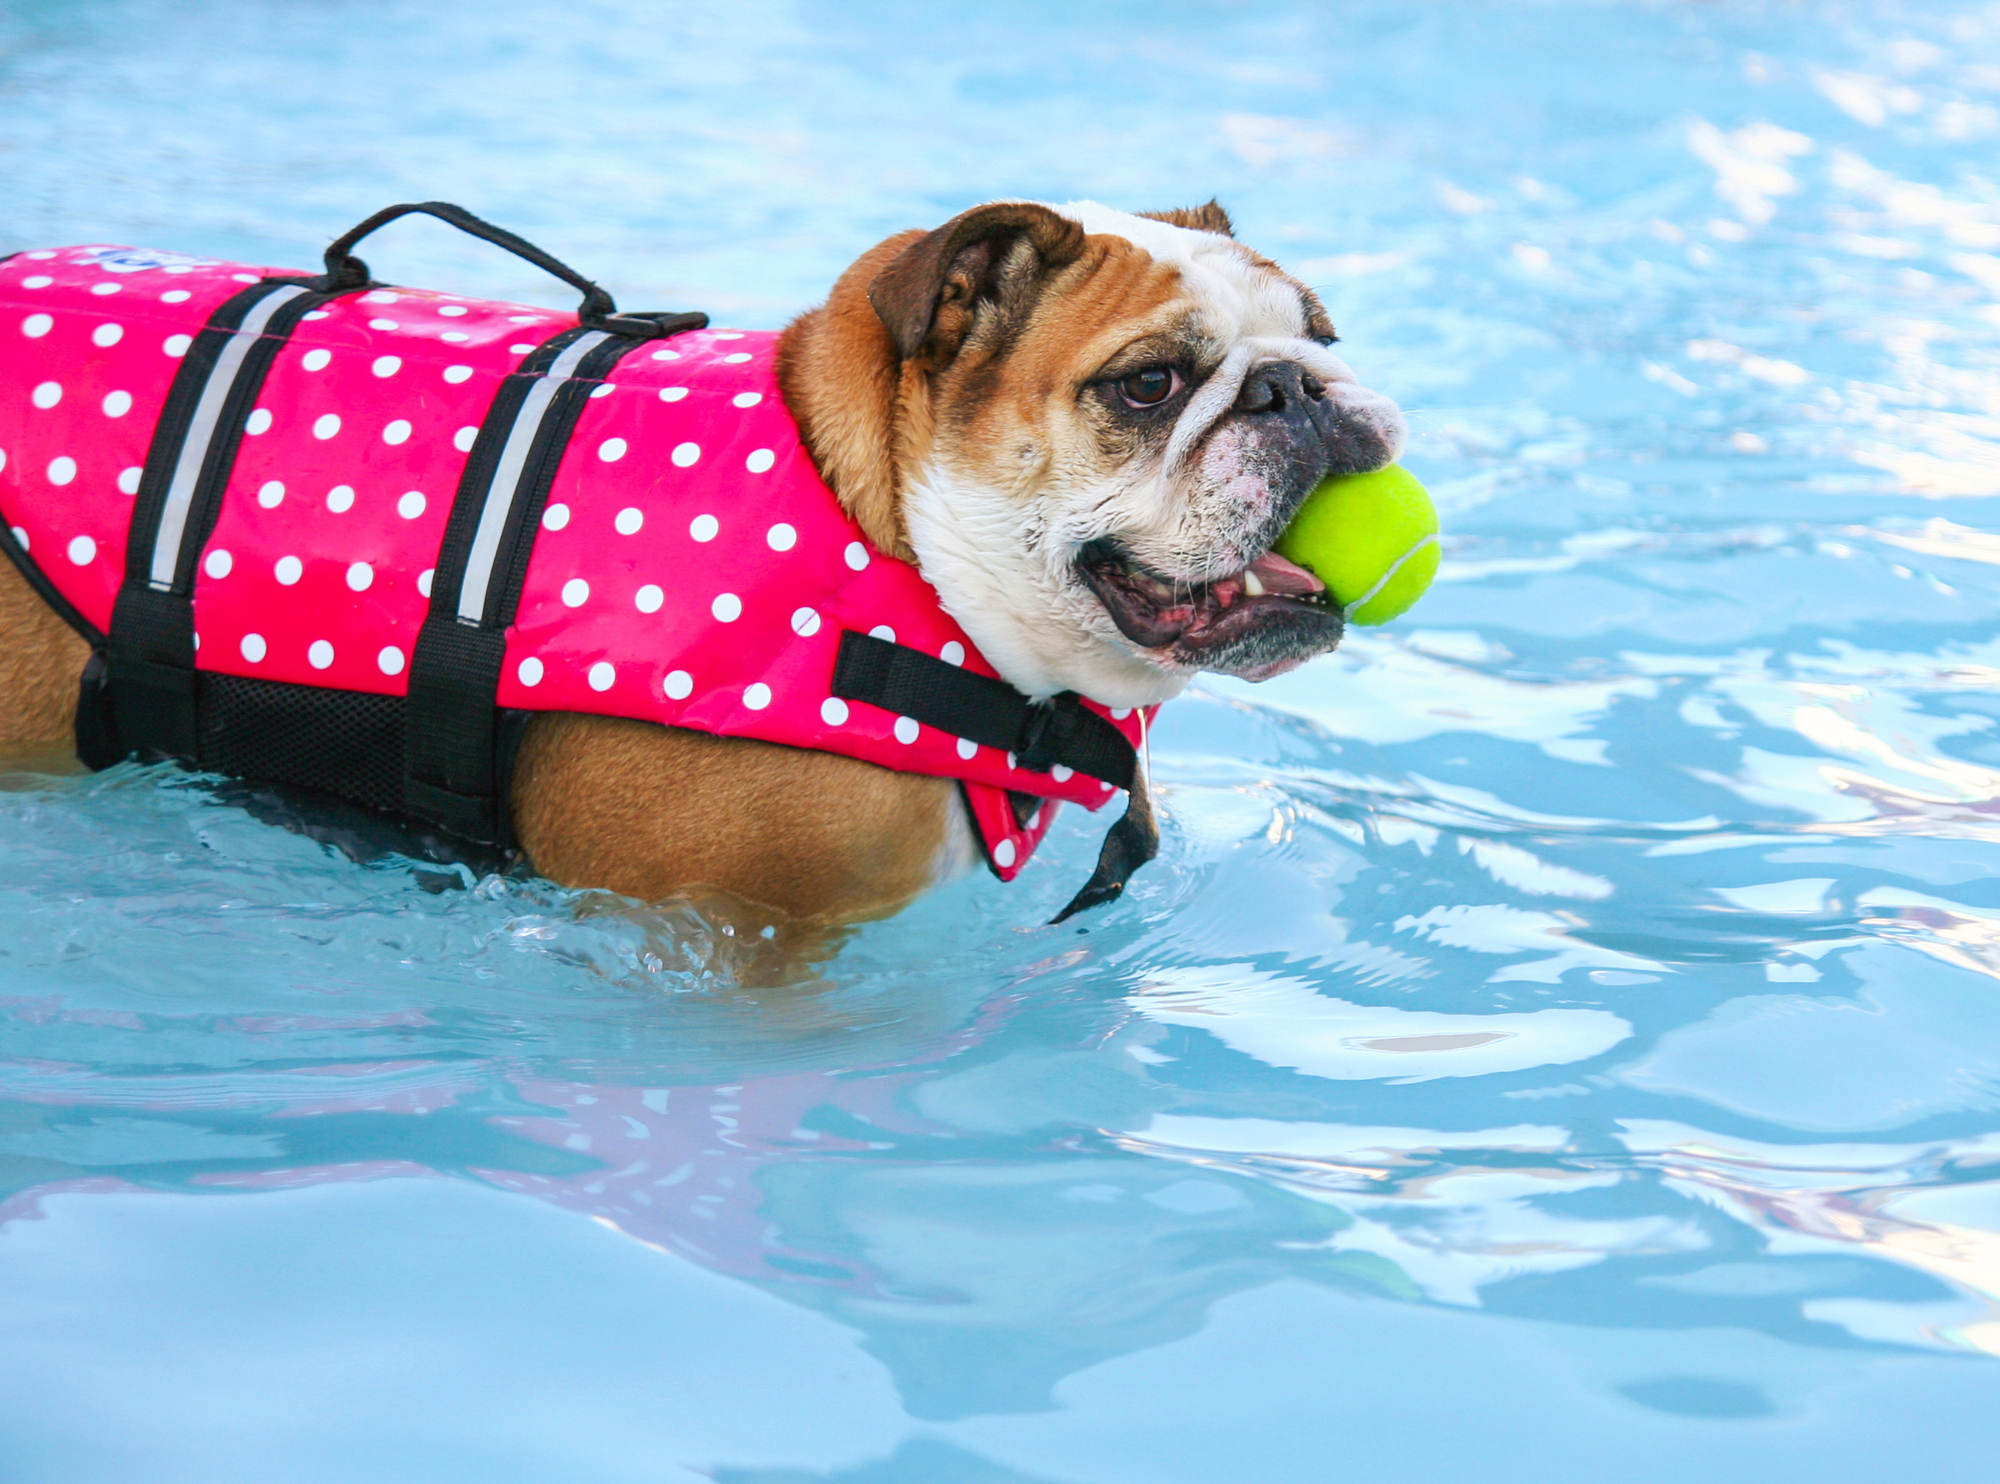 bulldog with tennis ball standing in pool